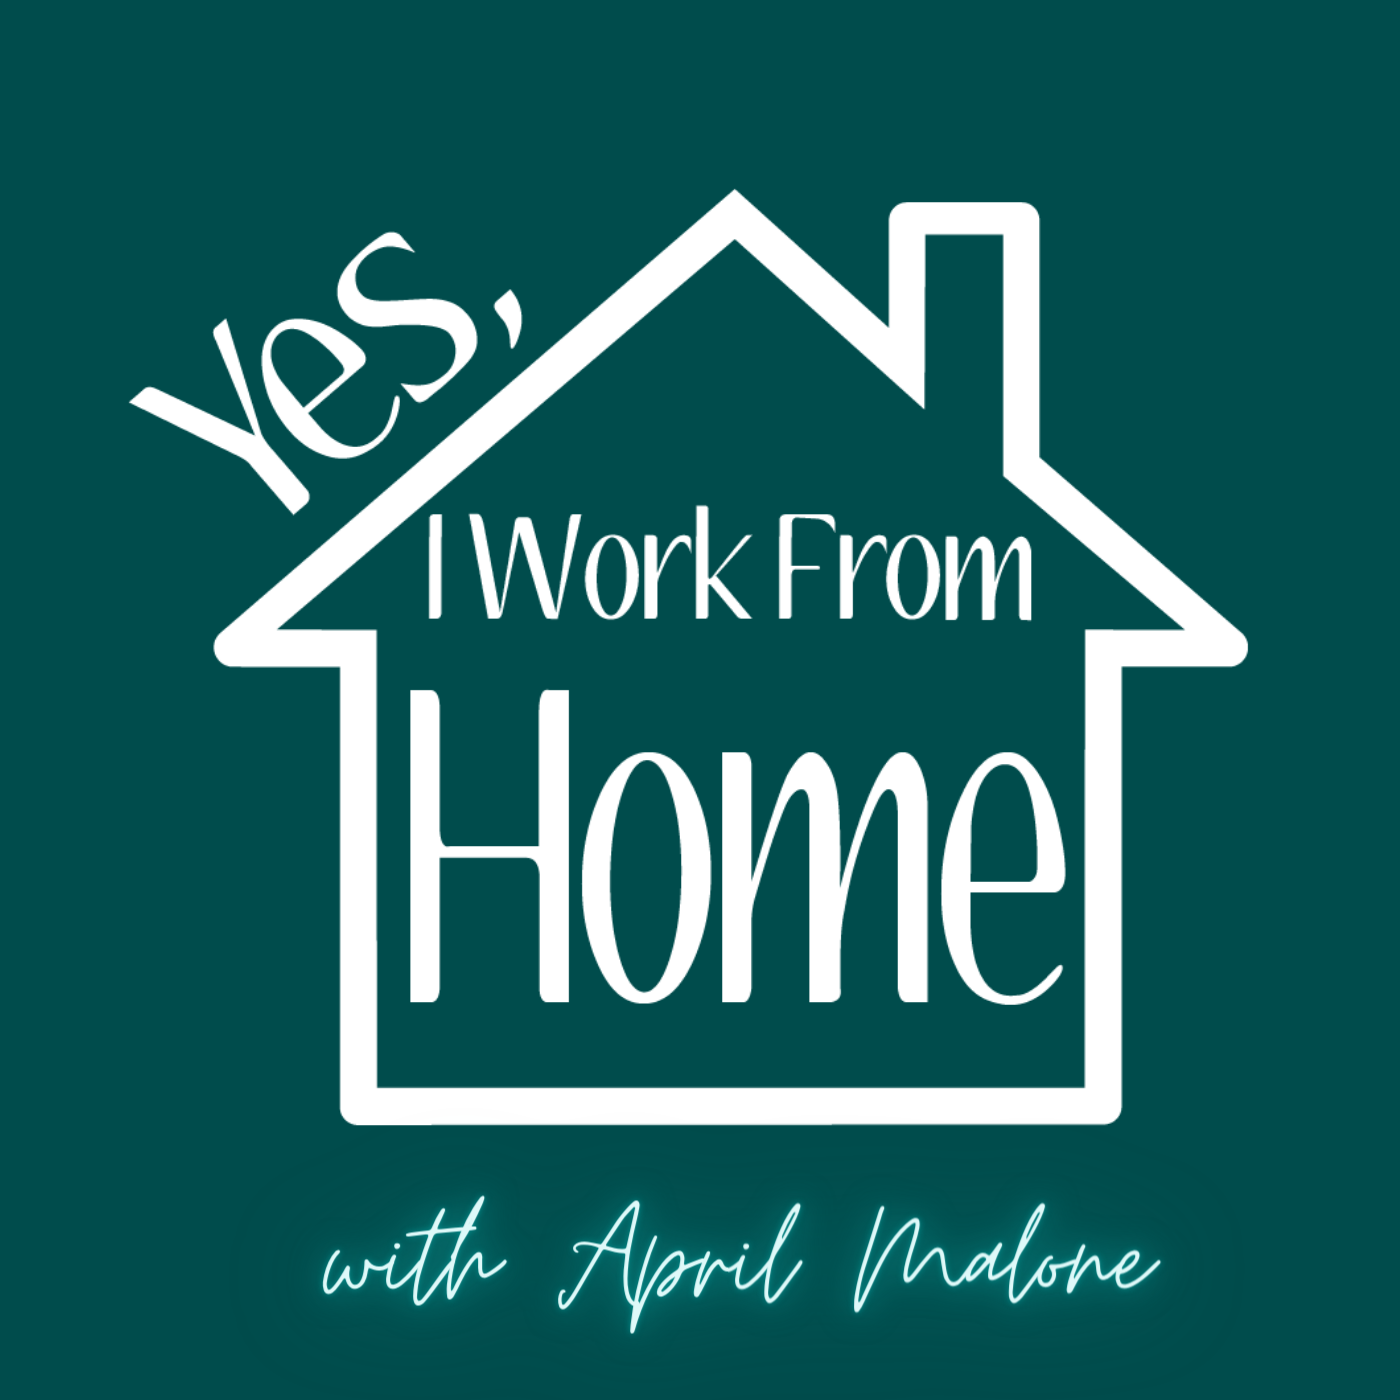 Show artwork for Yes, I Work From Home